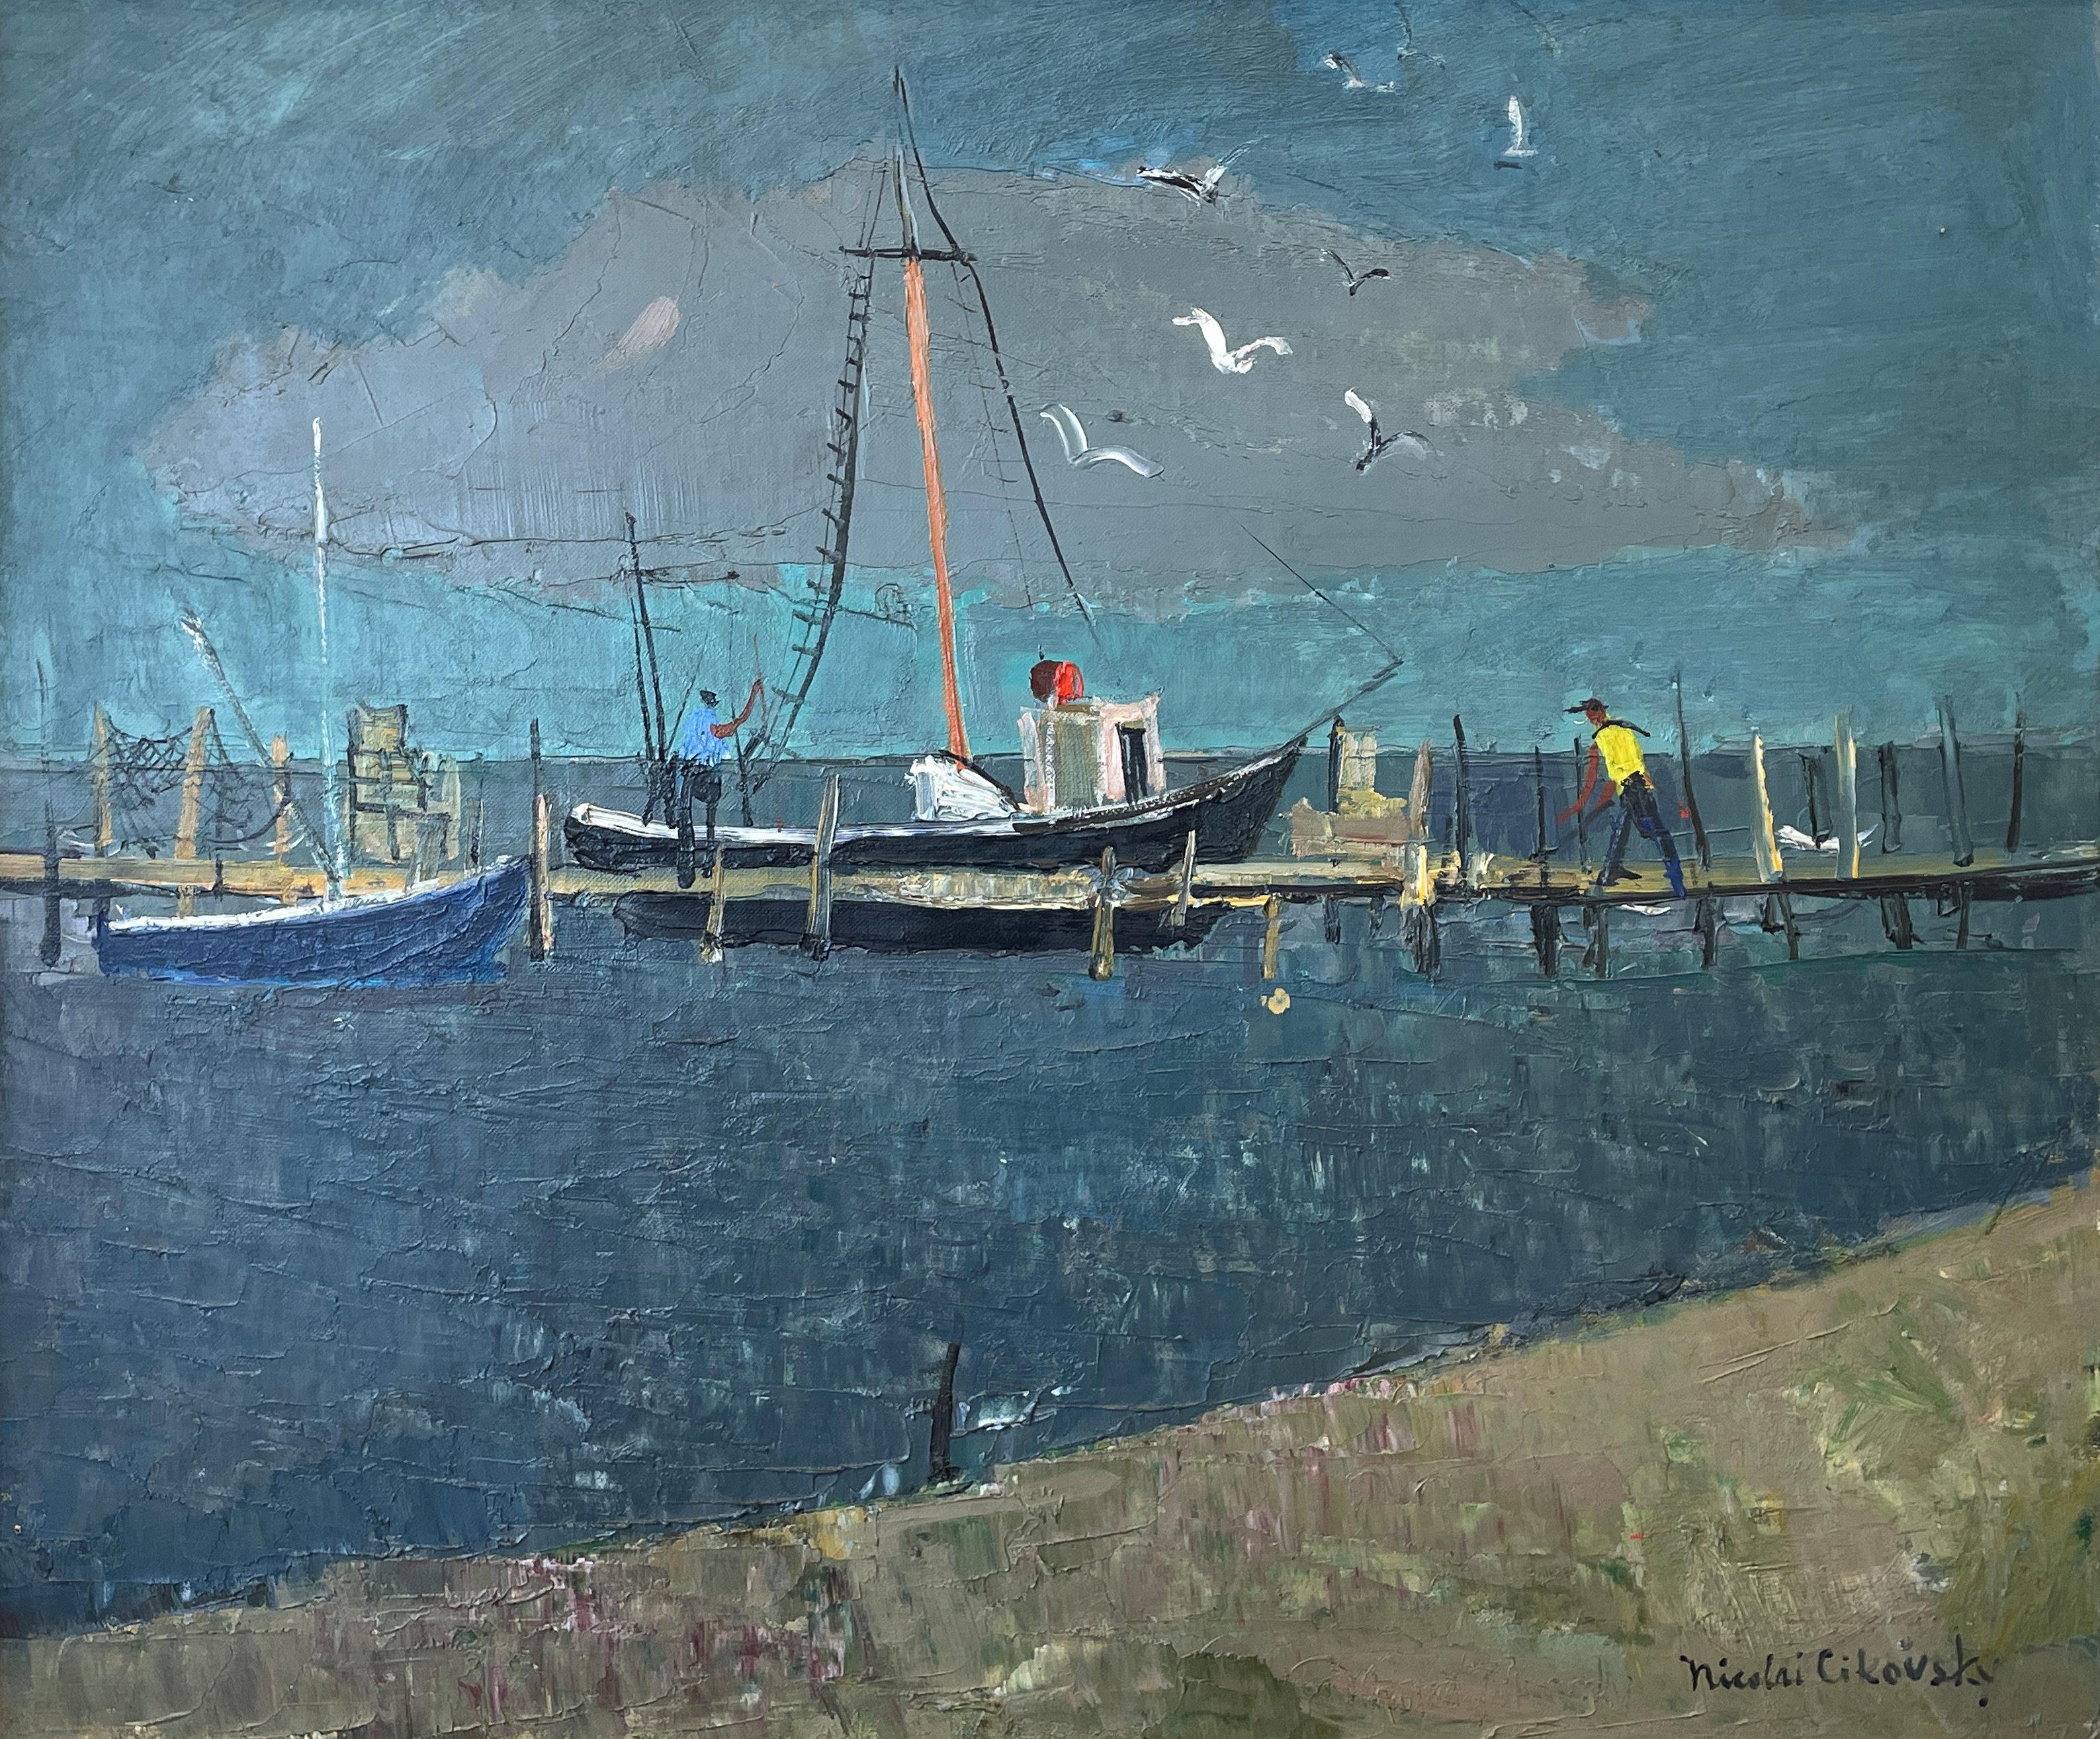 Nicolai Cikovsky
Boats at Dock, Montauk
Signed lower right
Oil on canvasboard
20 x 24 inches

The well known and highly regarded landscape and figure painter Nicolai S. Cikovsky was born in Russia in 1894.  He studied at the Vilna Art School,